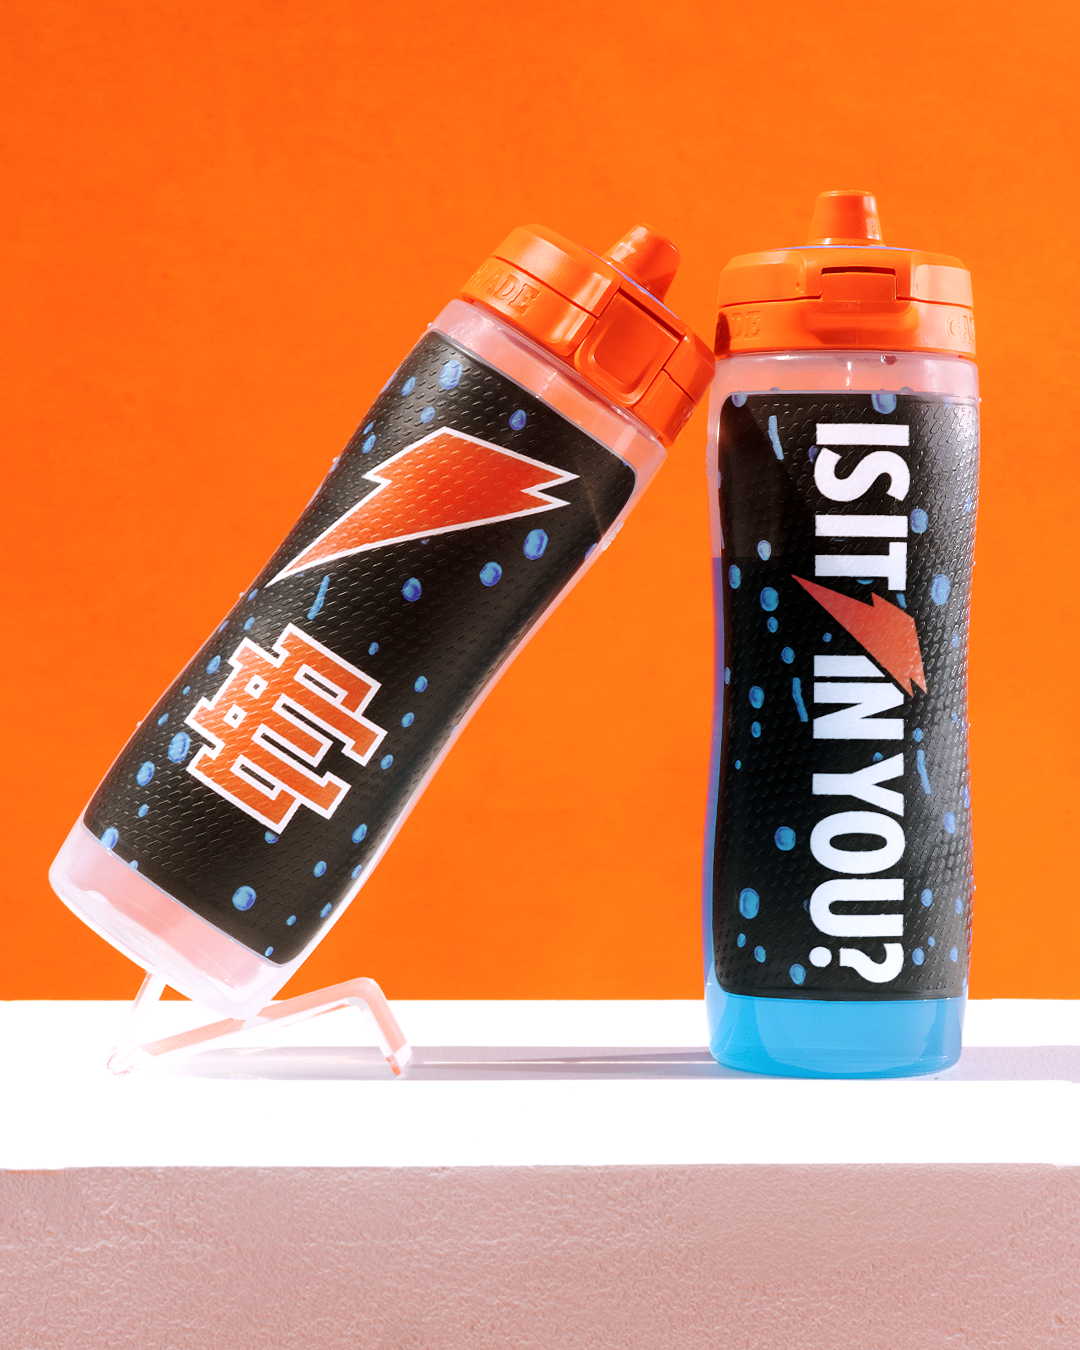 Two sports drink bottles with blue liquid, orange caps, and lightning bolt designs are displayed. The bottle on the left features &quot;40&quot; and the one on the right reads &quot;Is it in you?&quot;